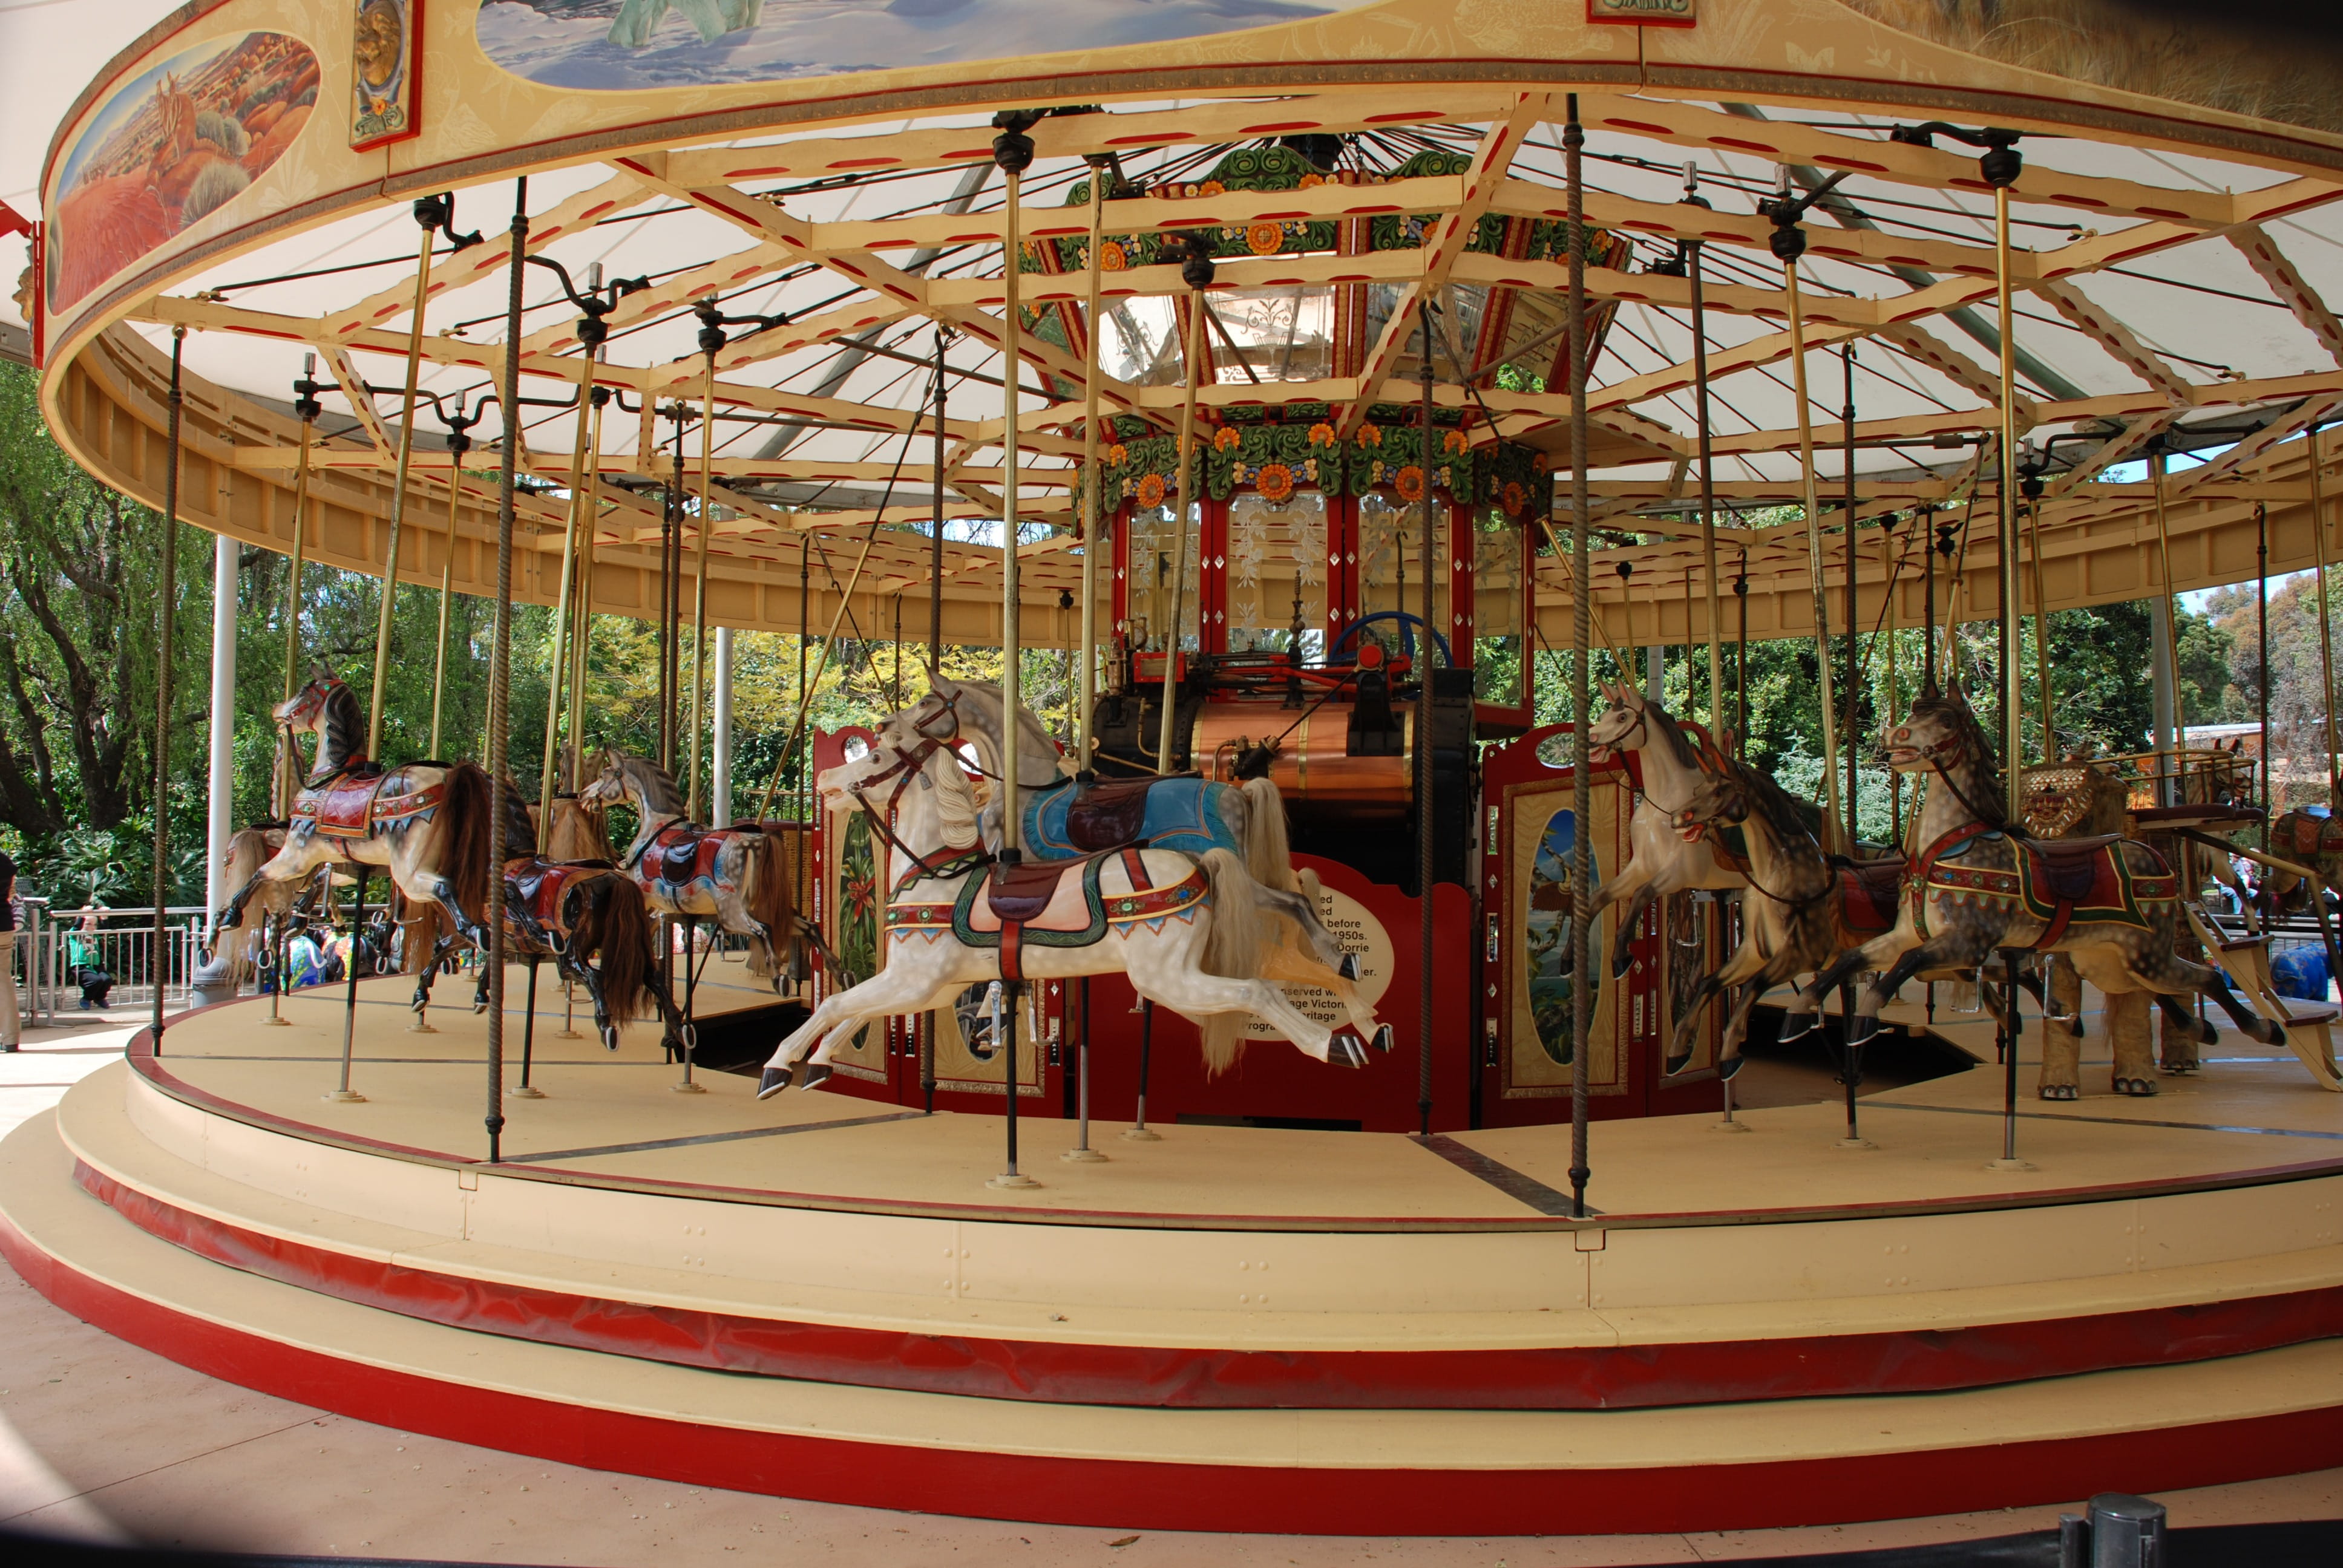 beige and red horse carousel, Merry-Go-Round, Ride, Fun, amusement